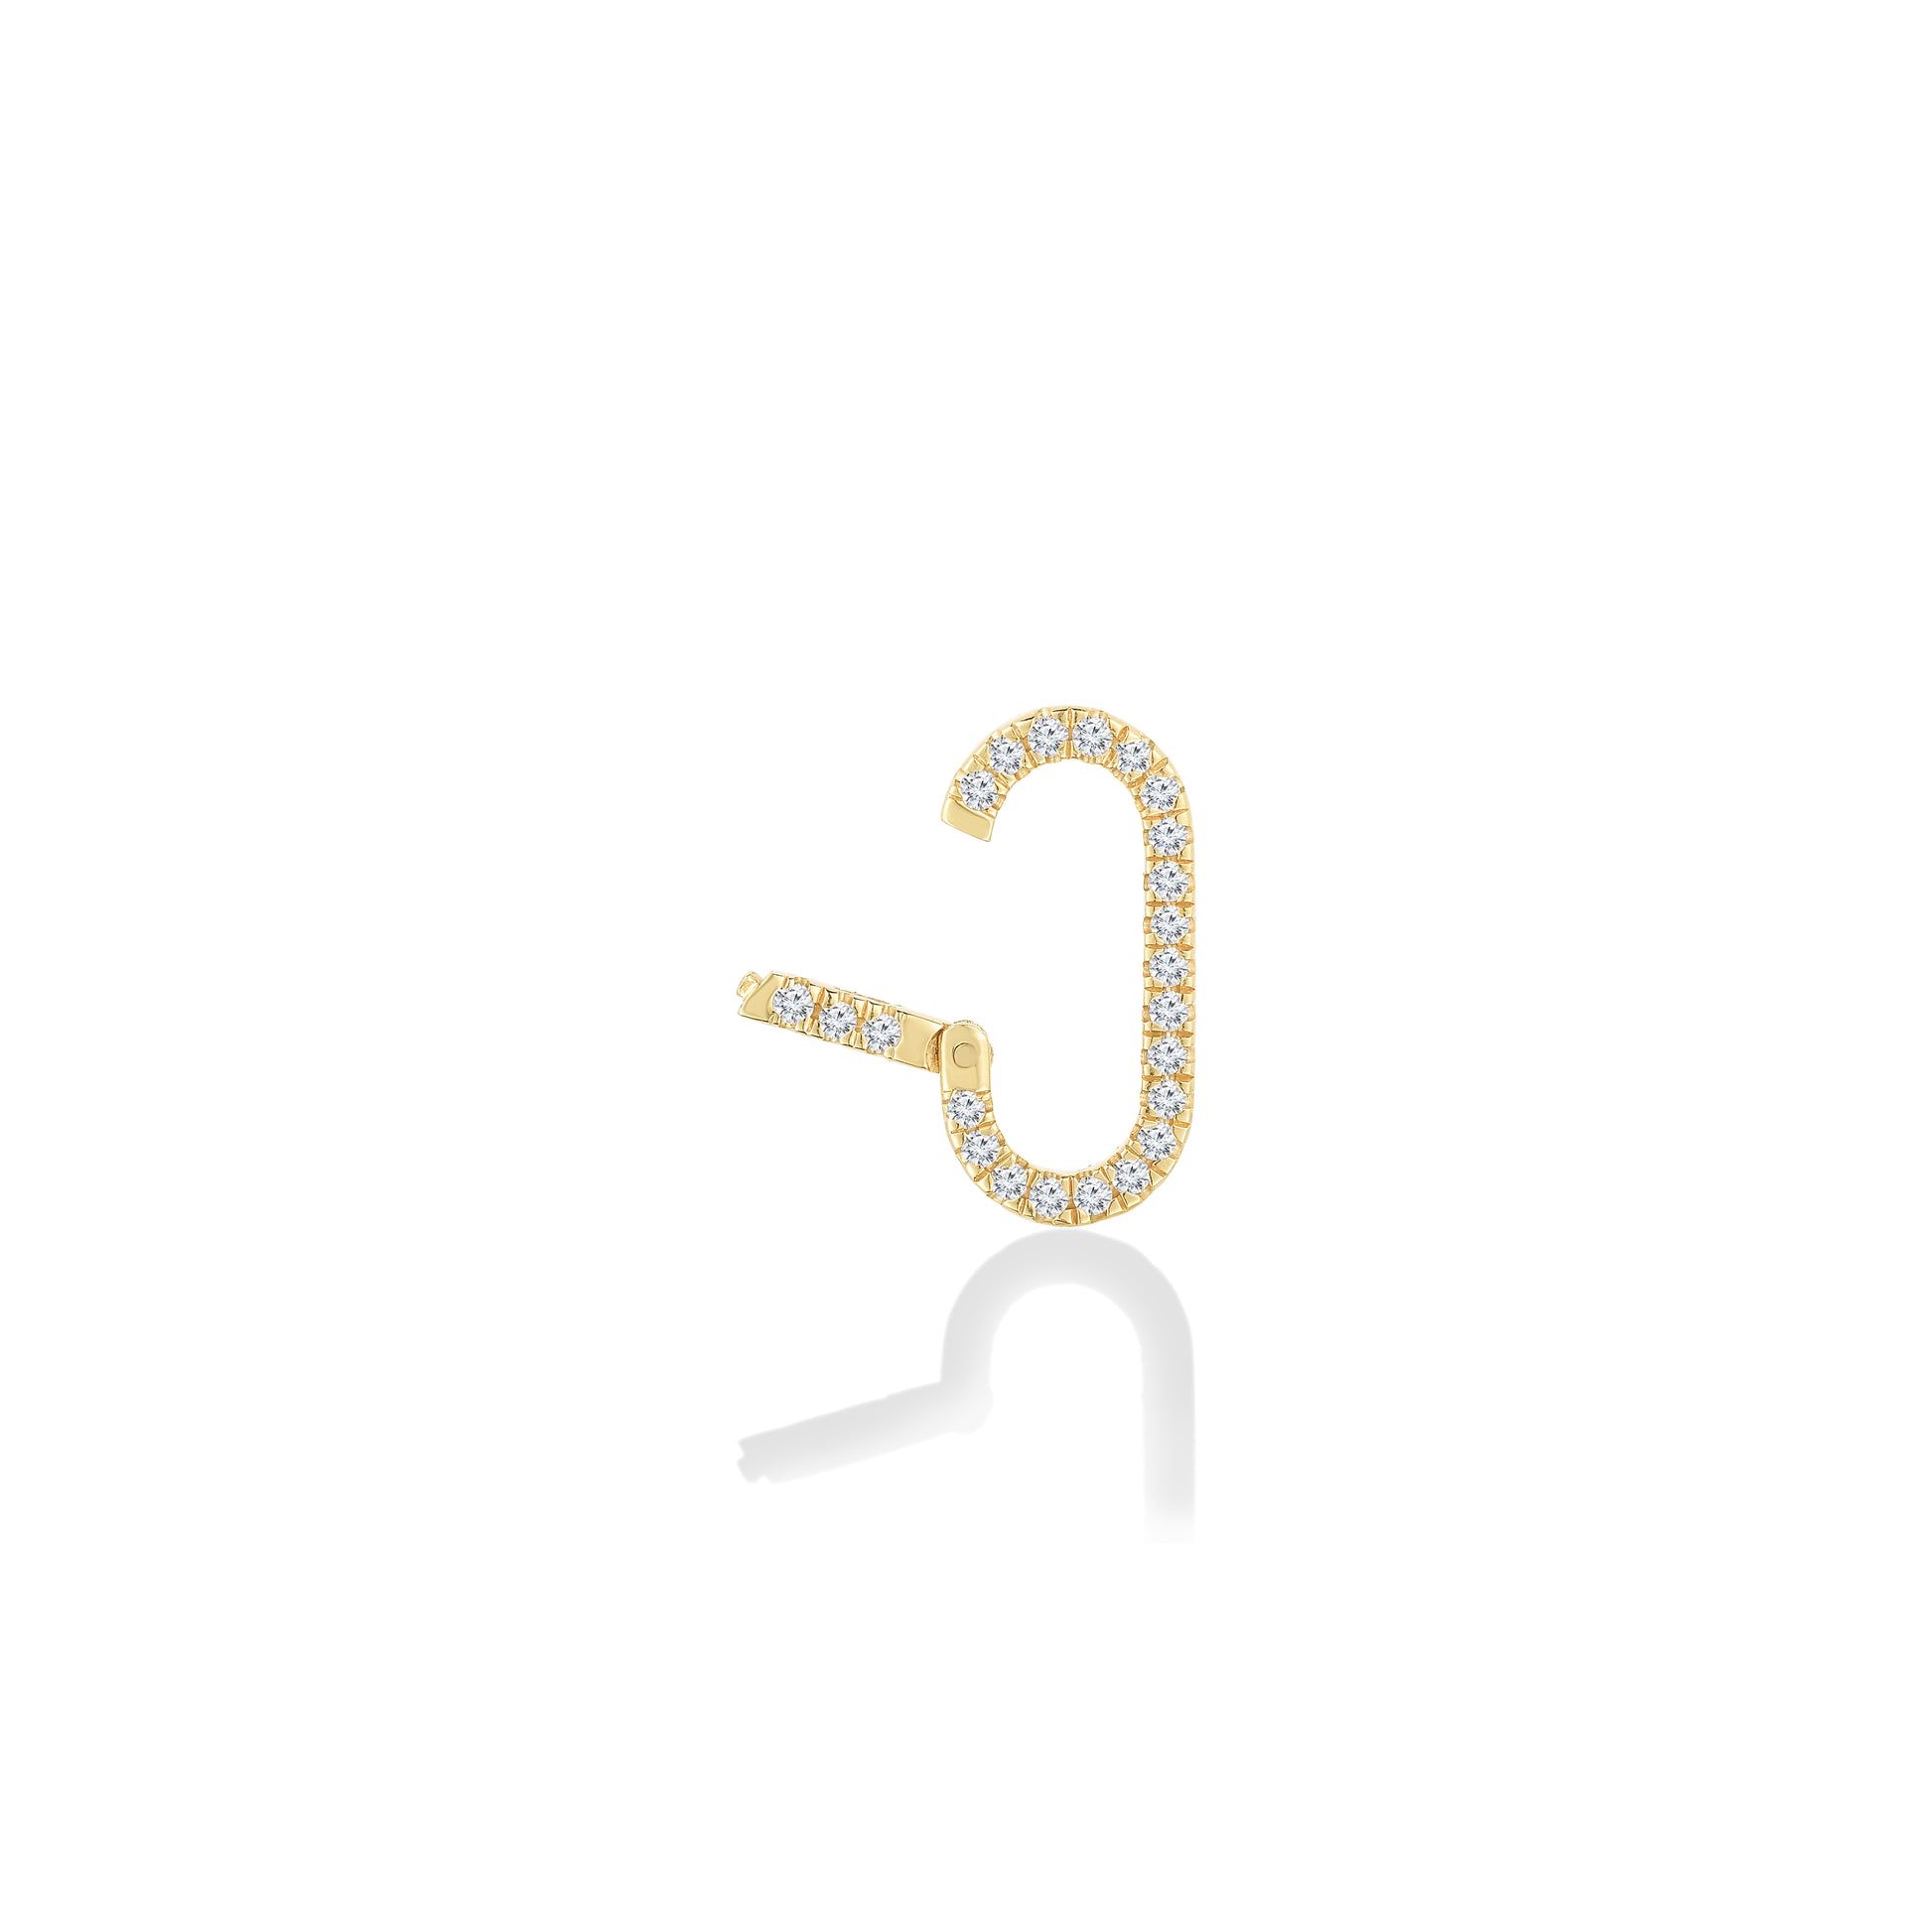 14k yellow gold oval locking charm with pave diamonds on facades.